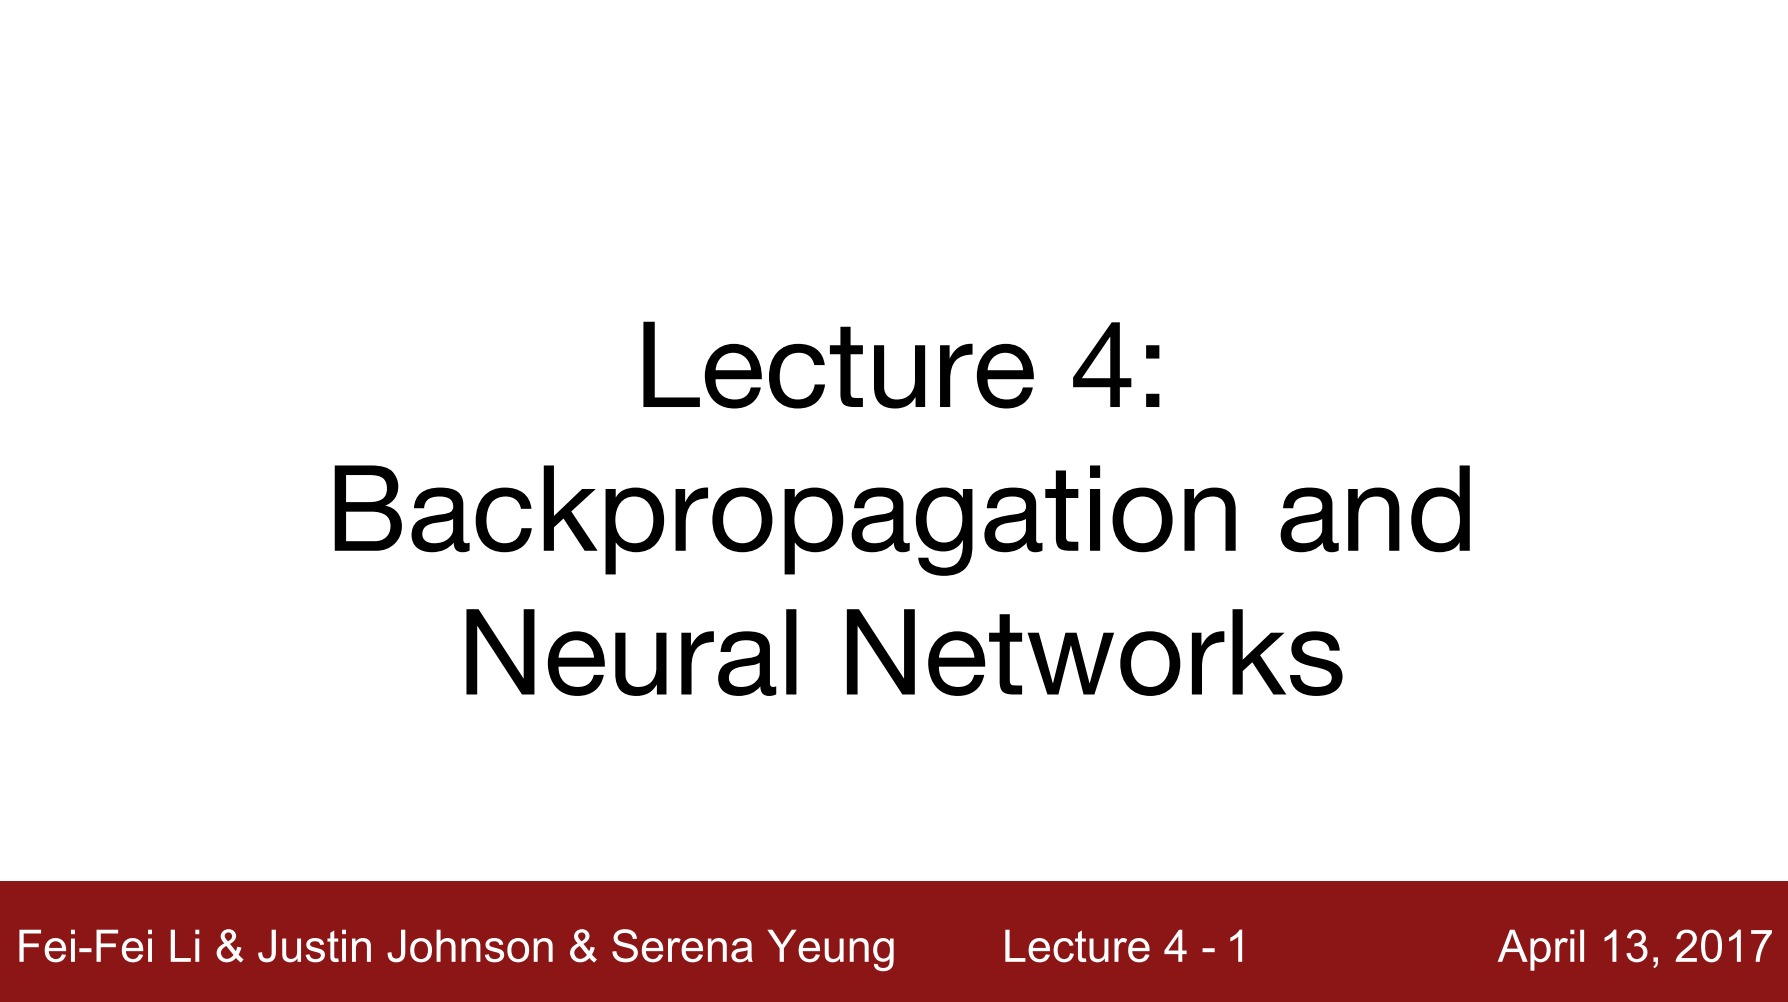 4. Backpropagation and Neural Networks